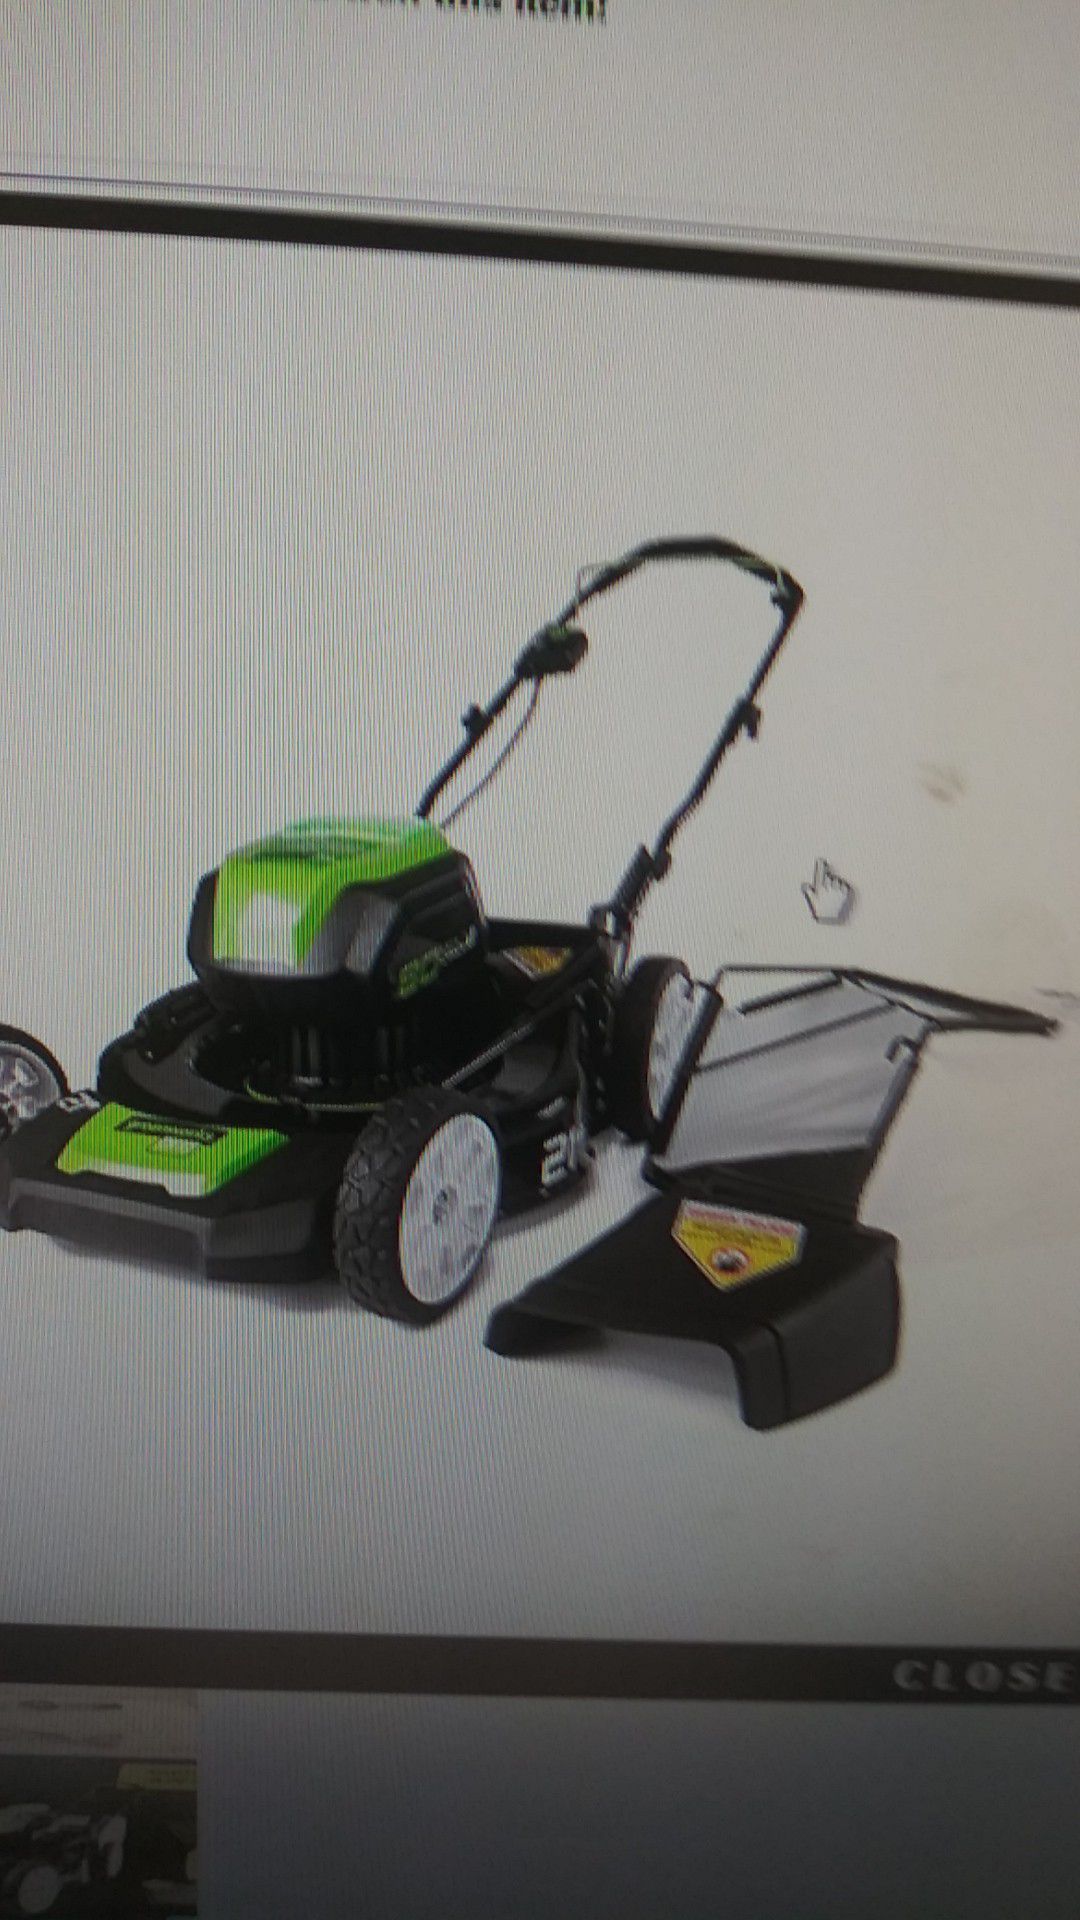 Greenwood Pro 80v 21-in Cordless Lawn Mower w/Battery